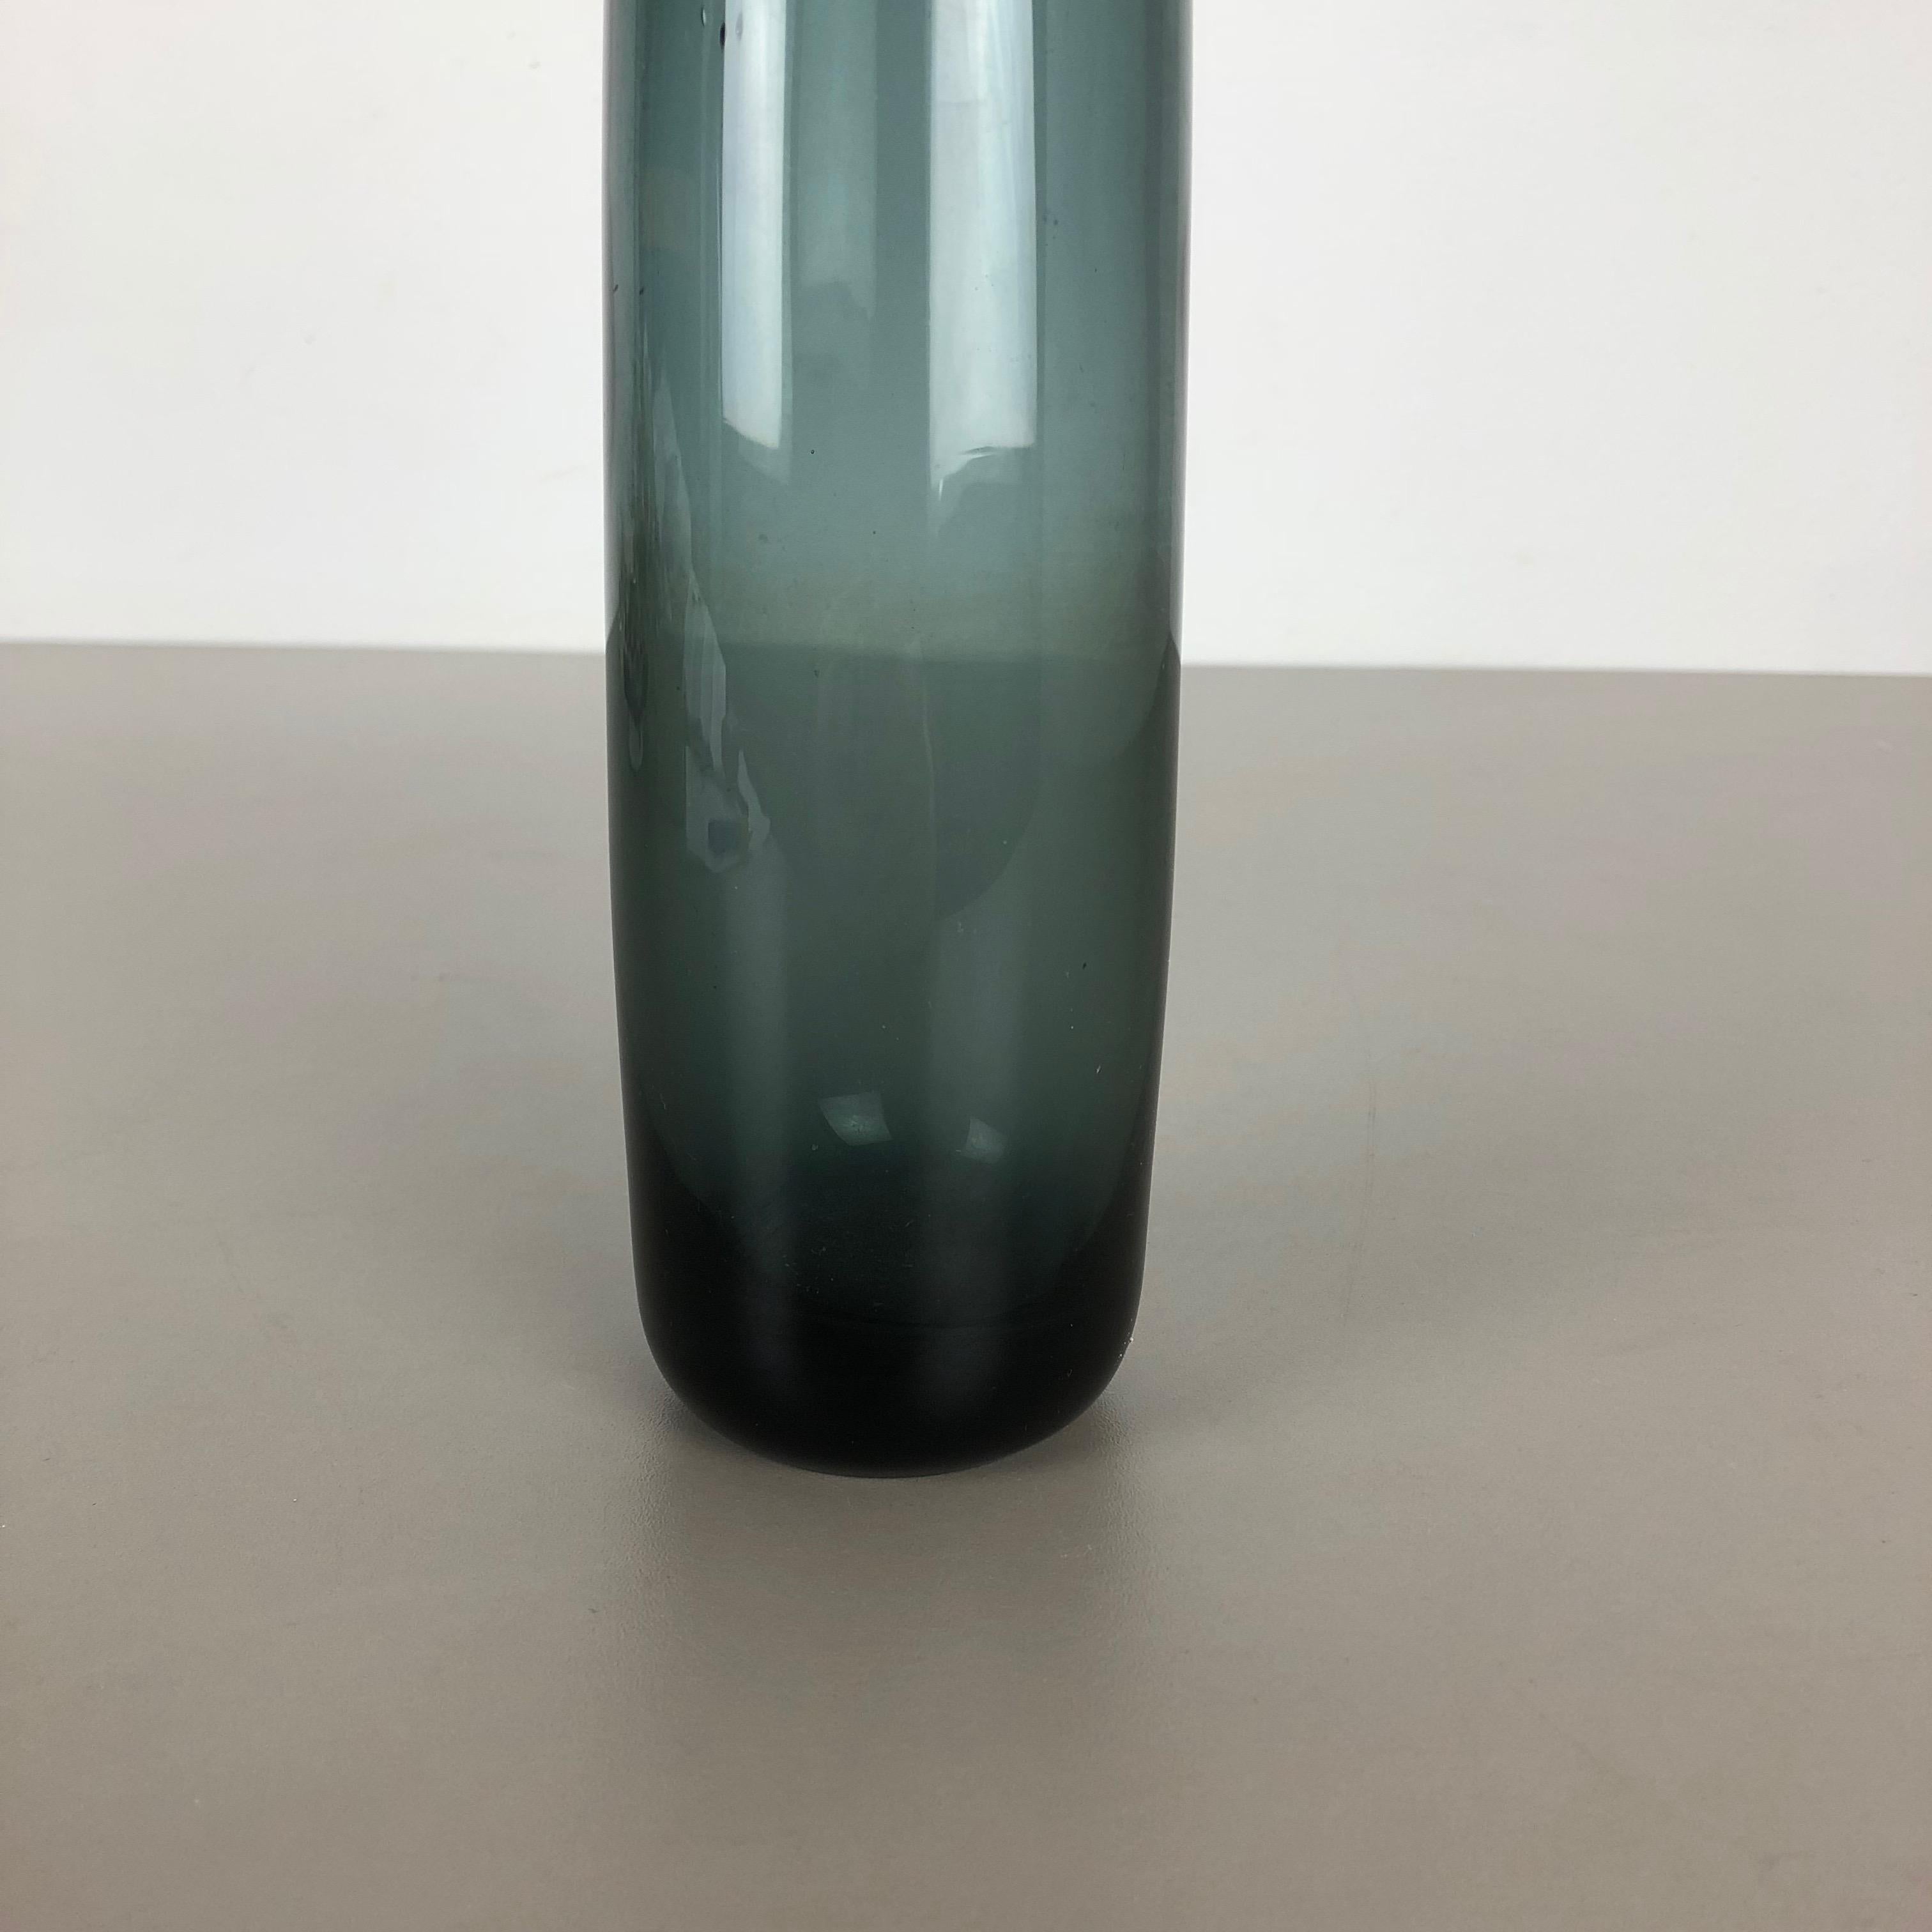 Large Vintage 1960s Turmalin Vase by Wilhelm Wagenfeld for WMF, Germany Bauhaus In Good Condition For Sale In Kirchlengern, DE